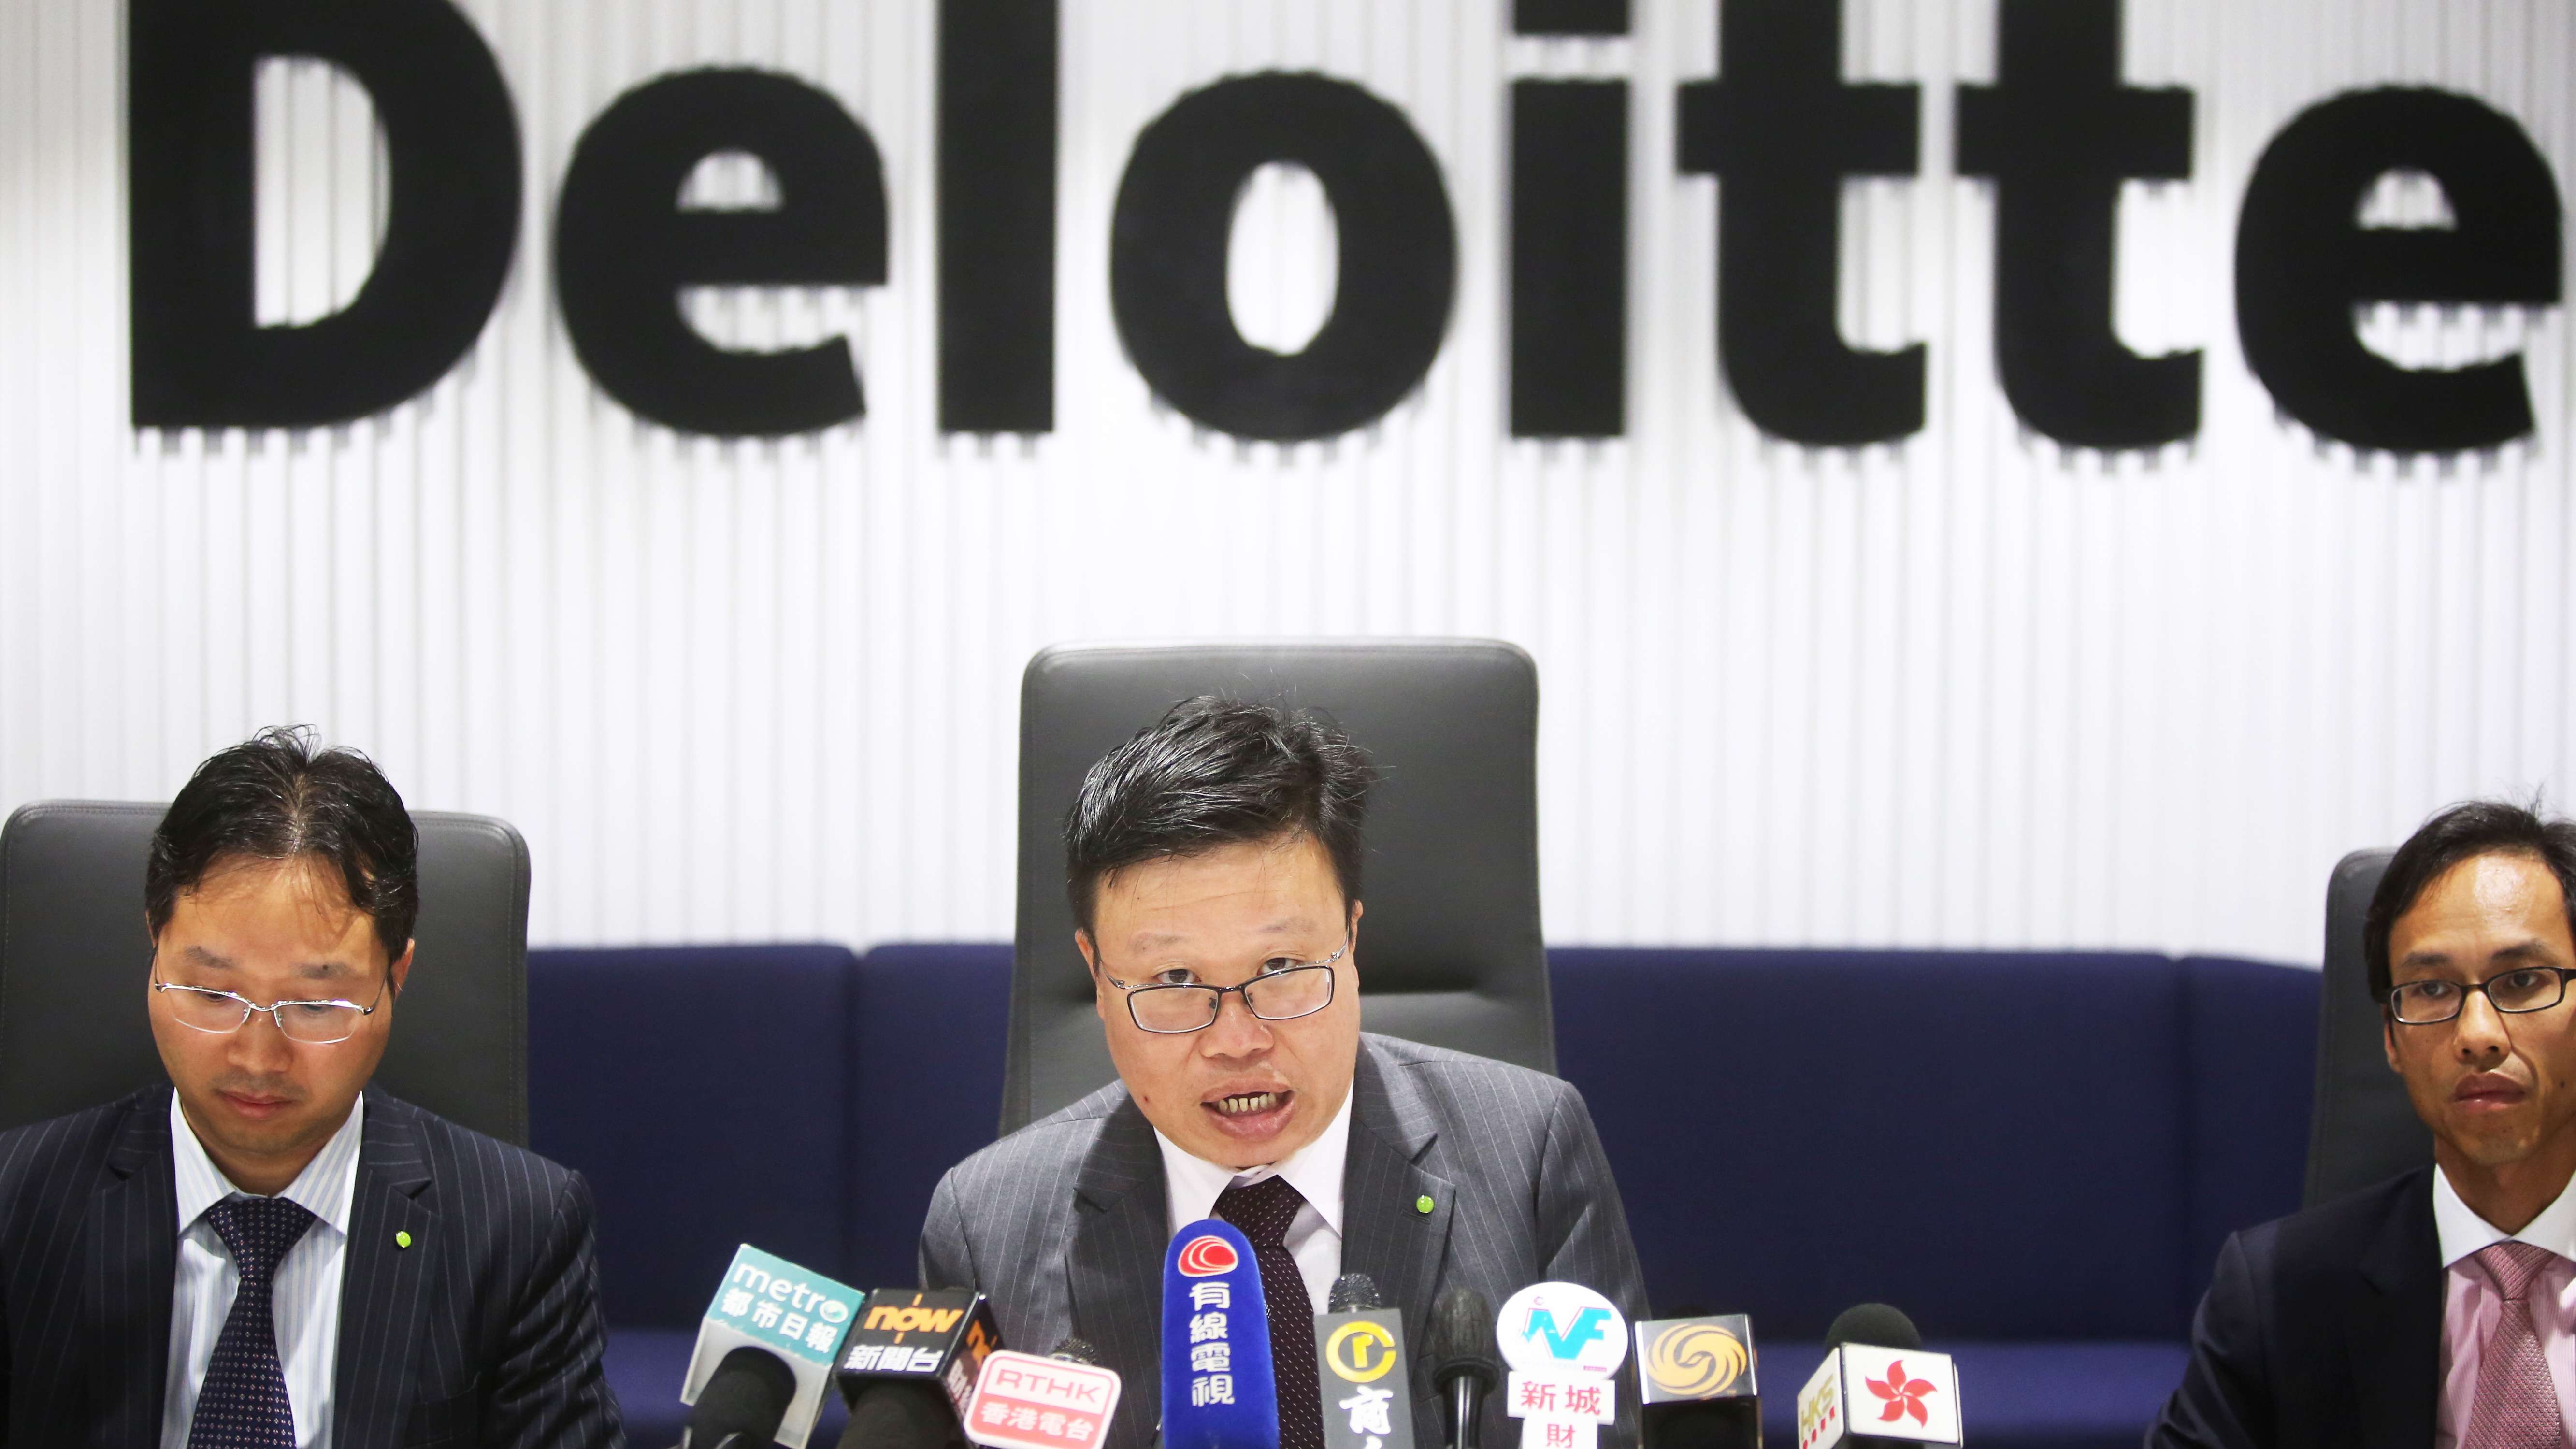 Deloitte China’s Derek Lai speaking in Admiralty about ATV’s future on Tuesday. Photo: Sam Tsang